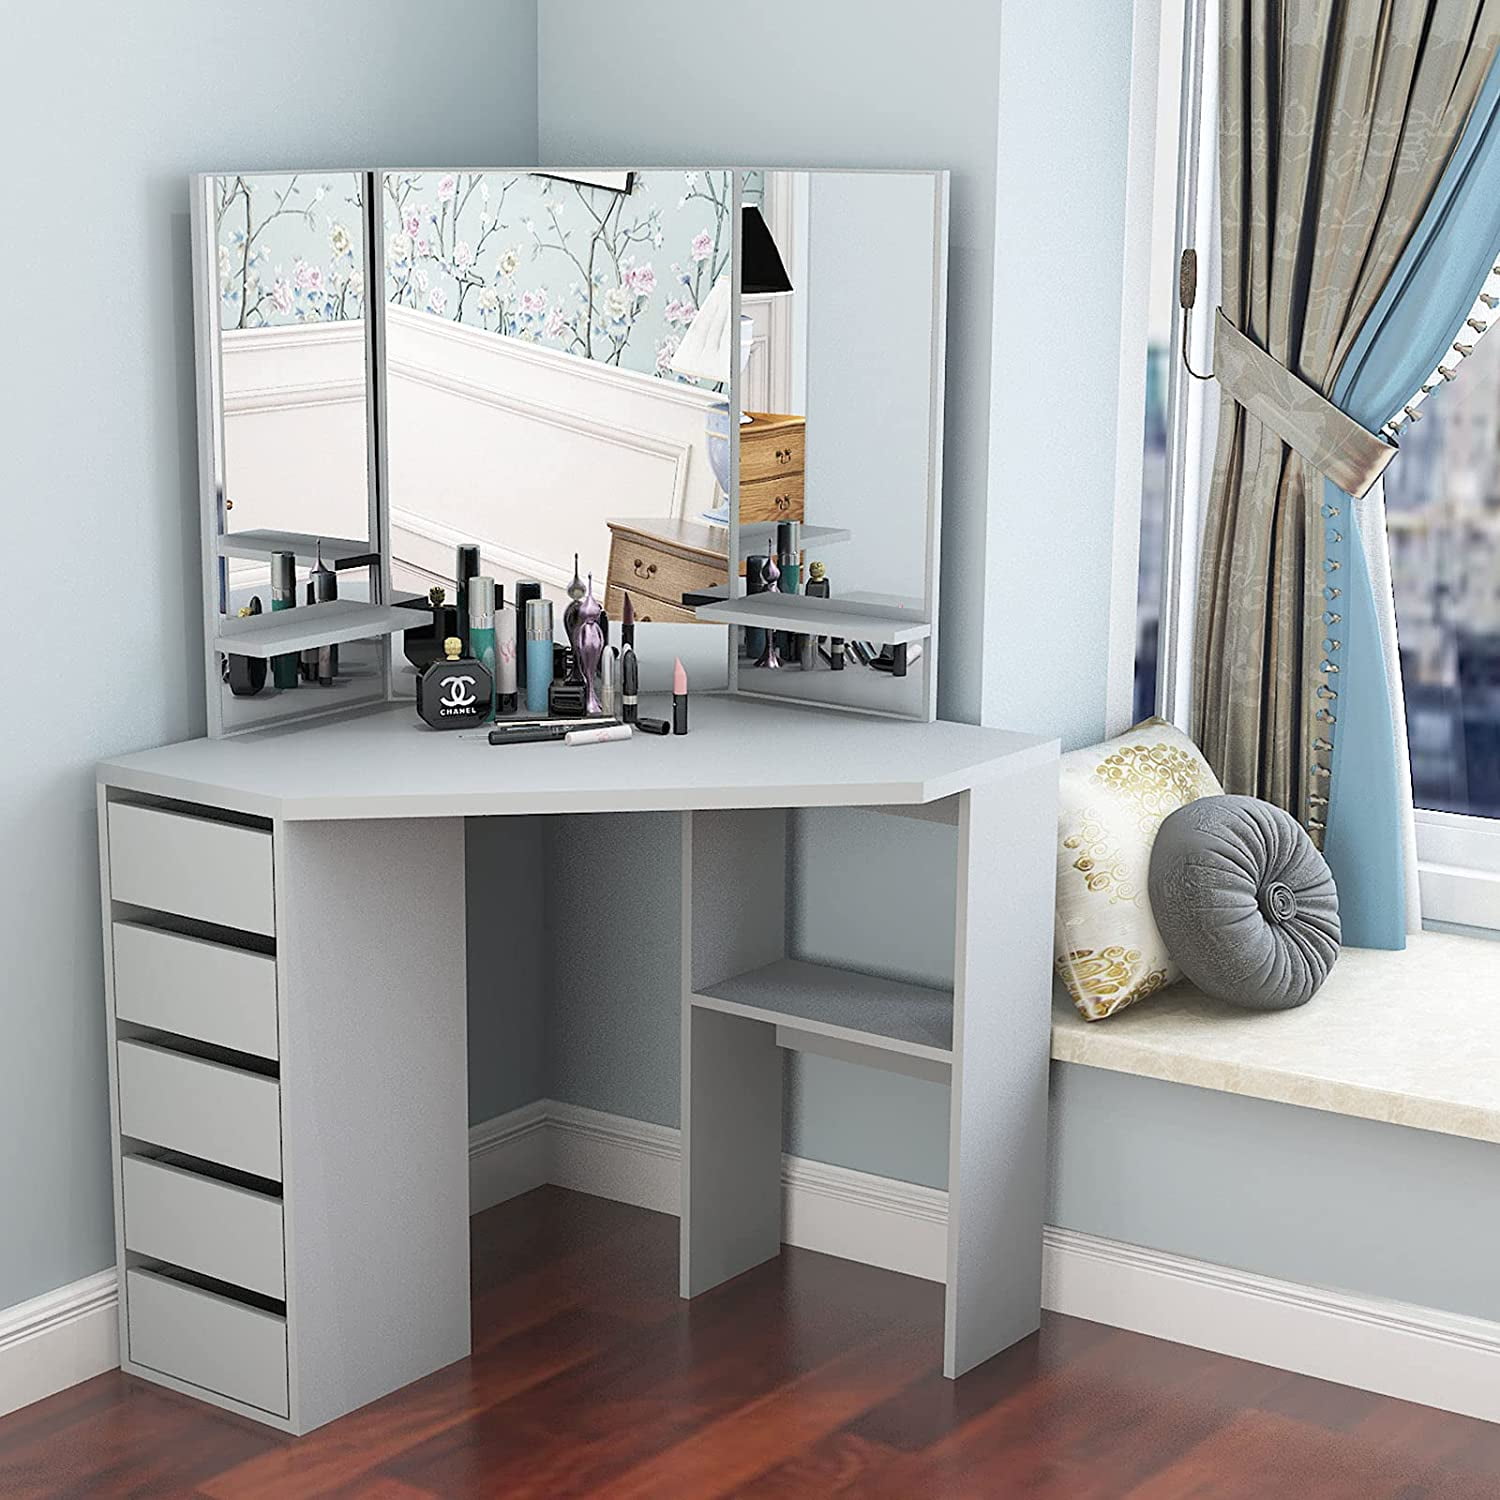 Grey Hironpal Corner Curved Dressing Table Makeup Vanity Desk with 5 Drawer 3 Angle Mirror Makeup Vanity Table Bedroom Furniture with 25mm Thick High Gloss Table Top 